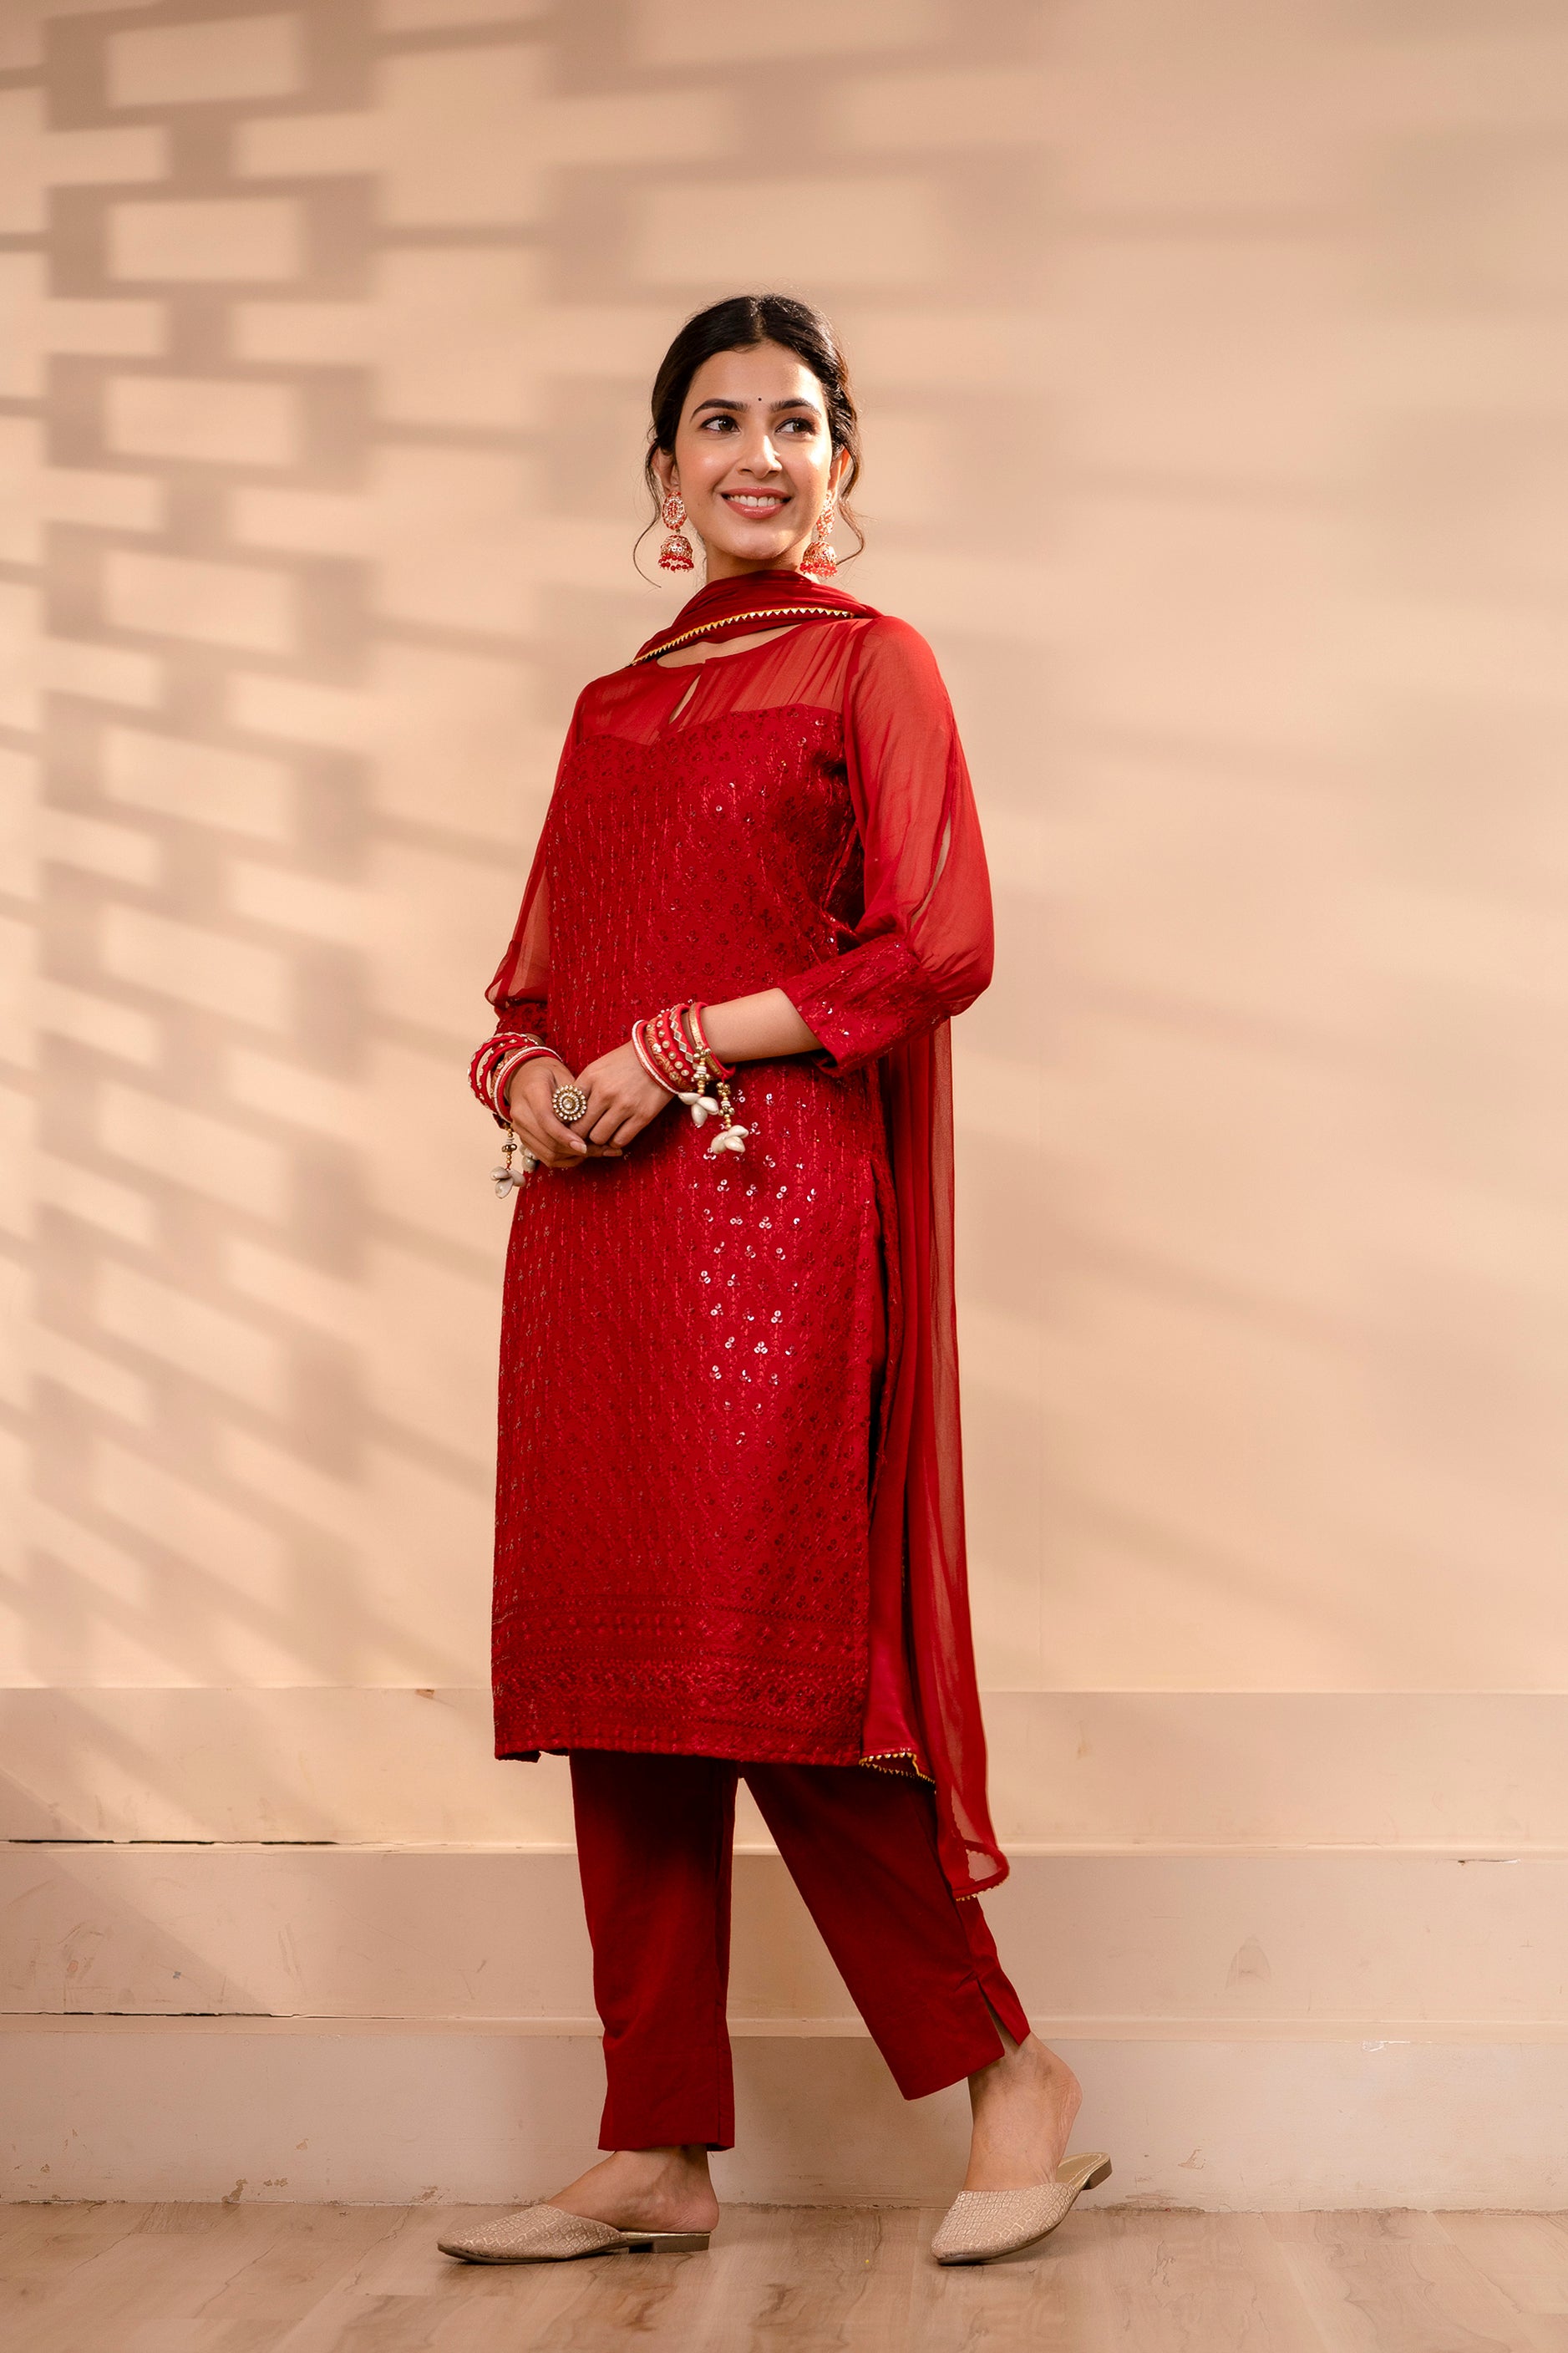 Women's Chiken Reddish Maroon Red Festive Suit Set 3Pc Adaah Collection - Saras The Label